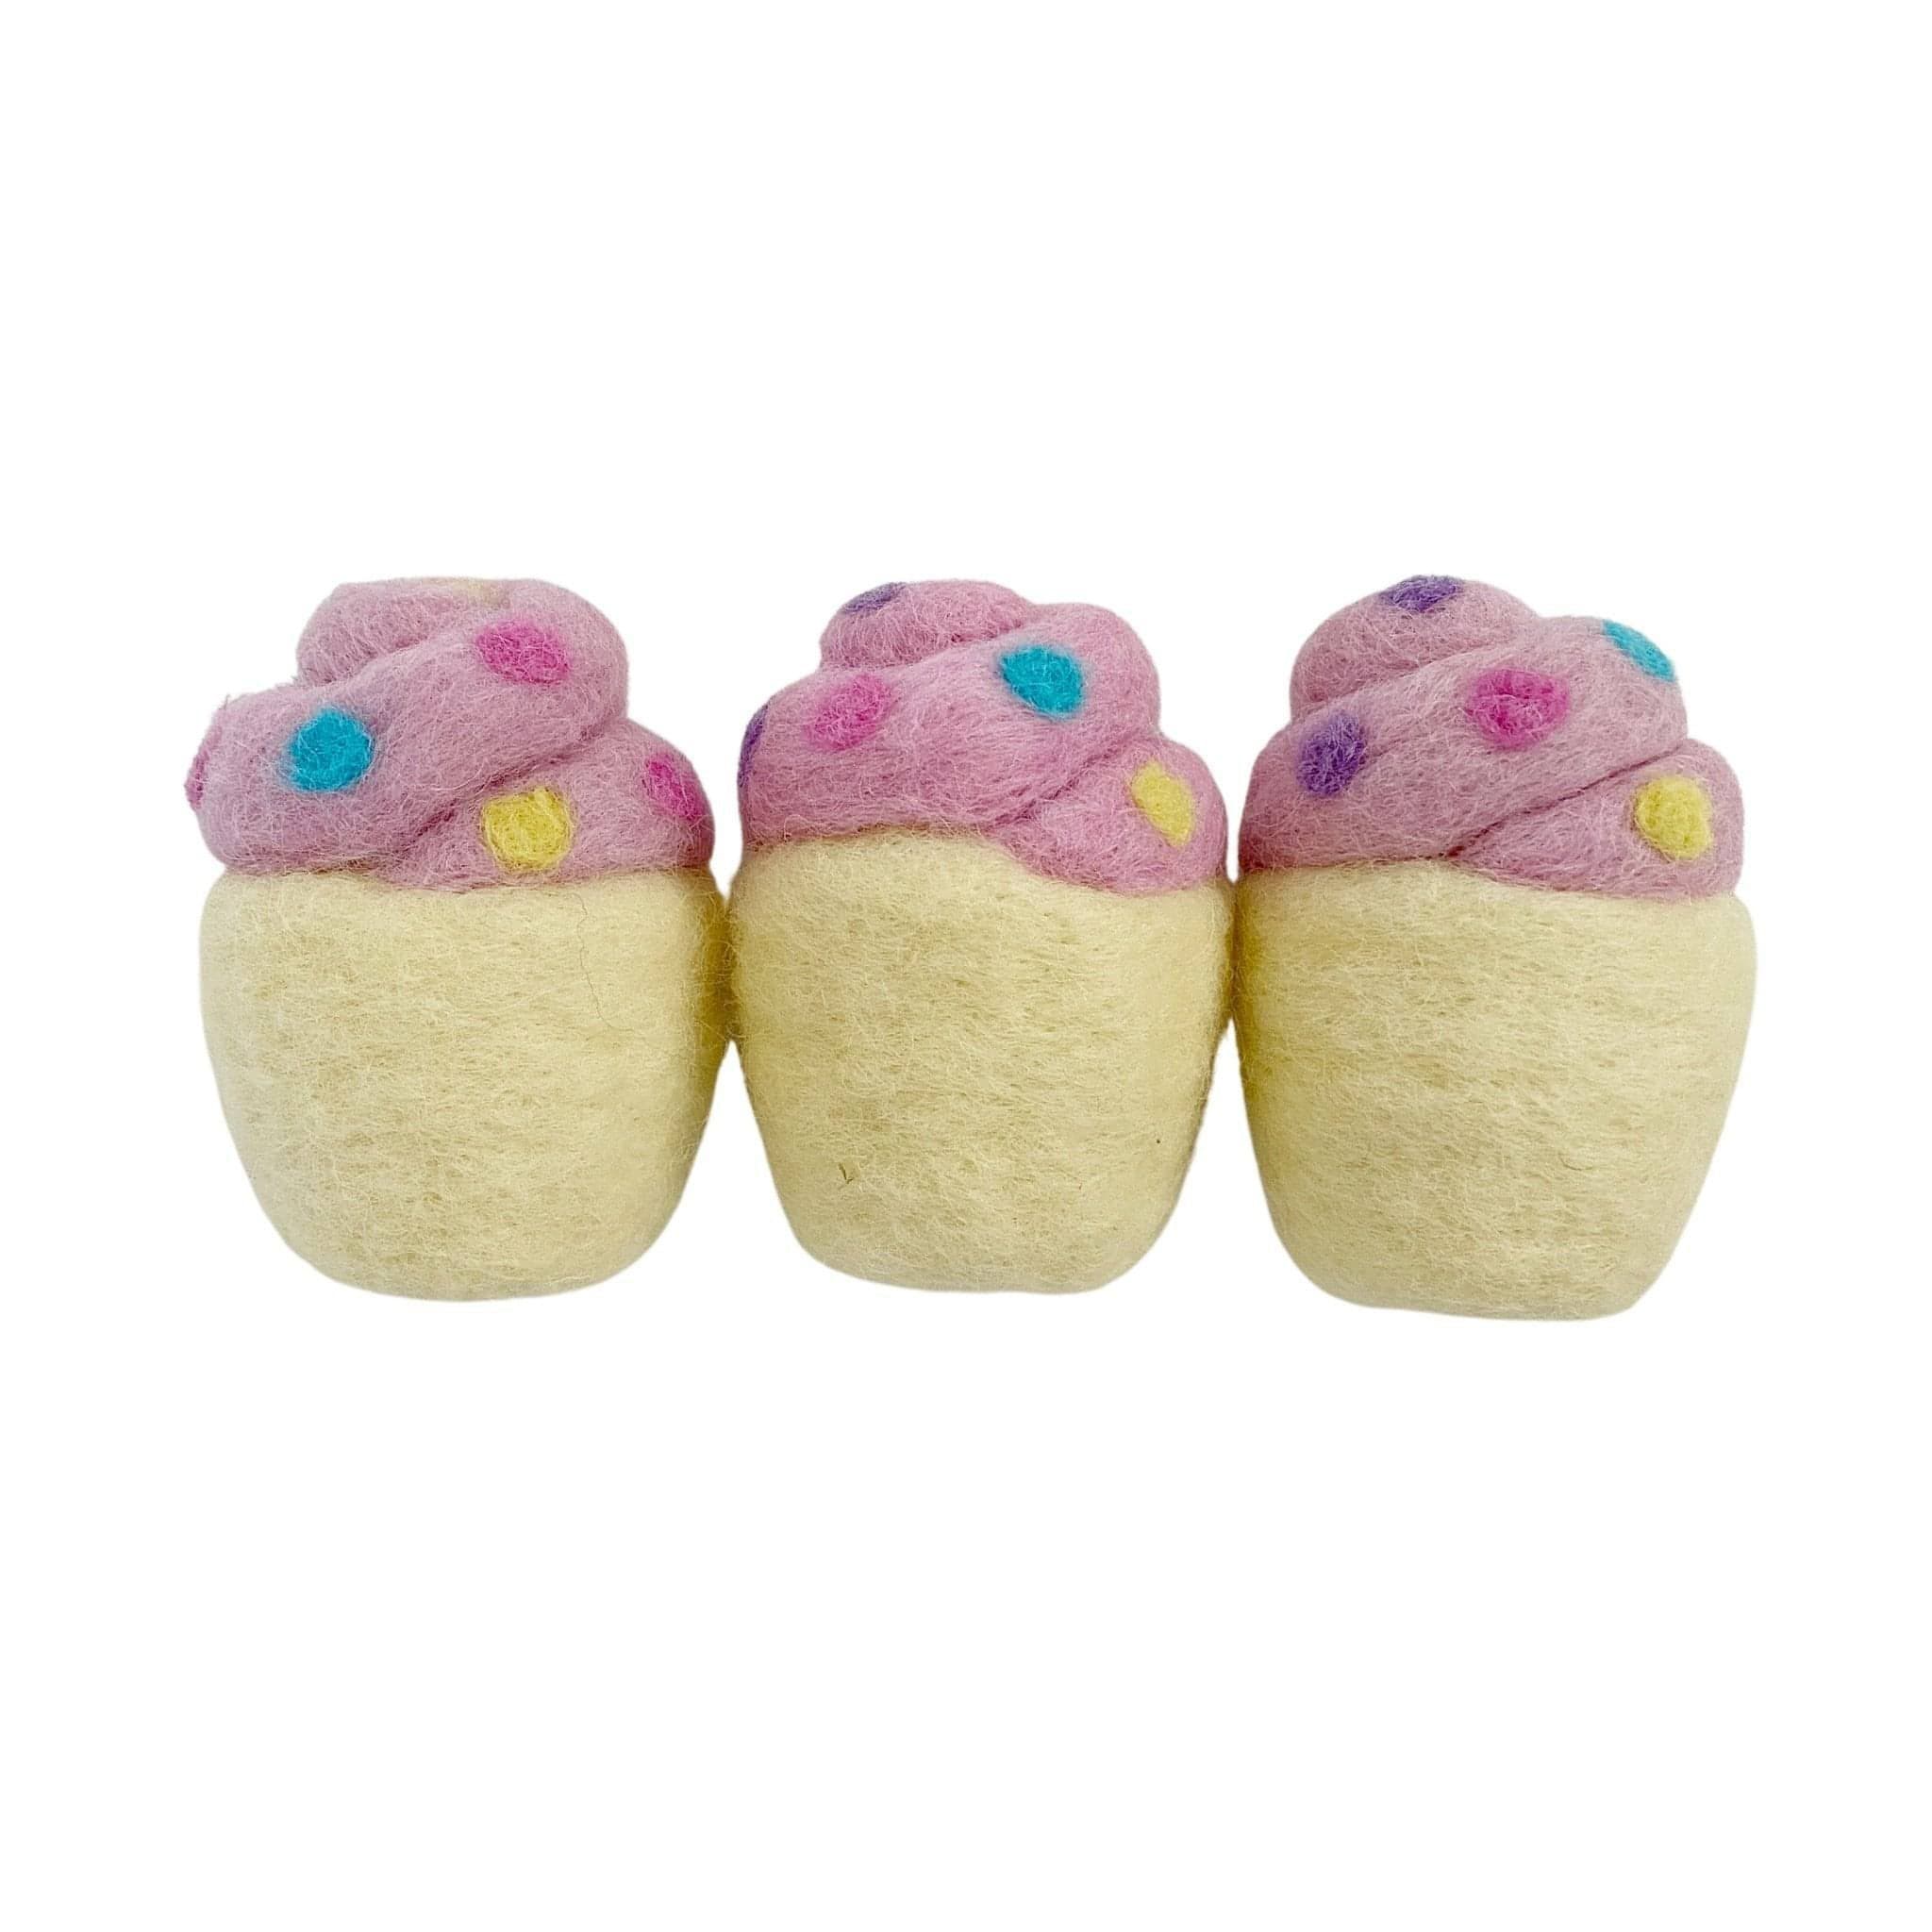 Felted Cupcakes-Set of 3 - Lily Sprout Collection